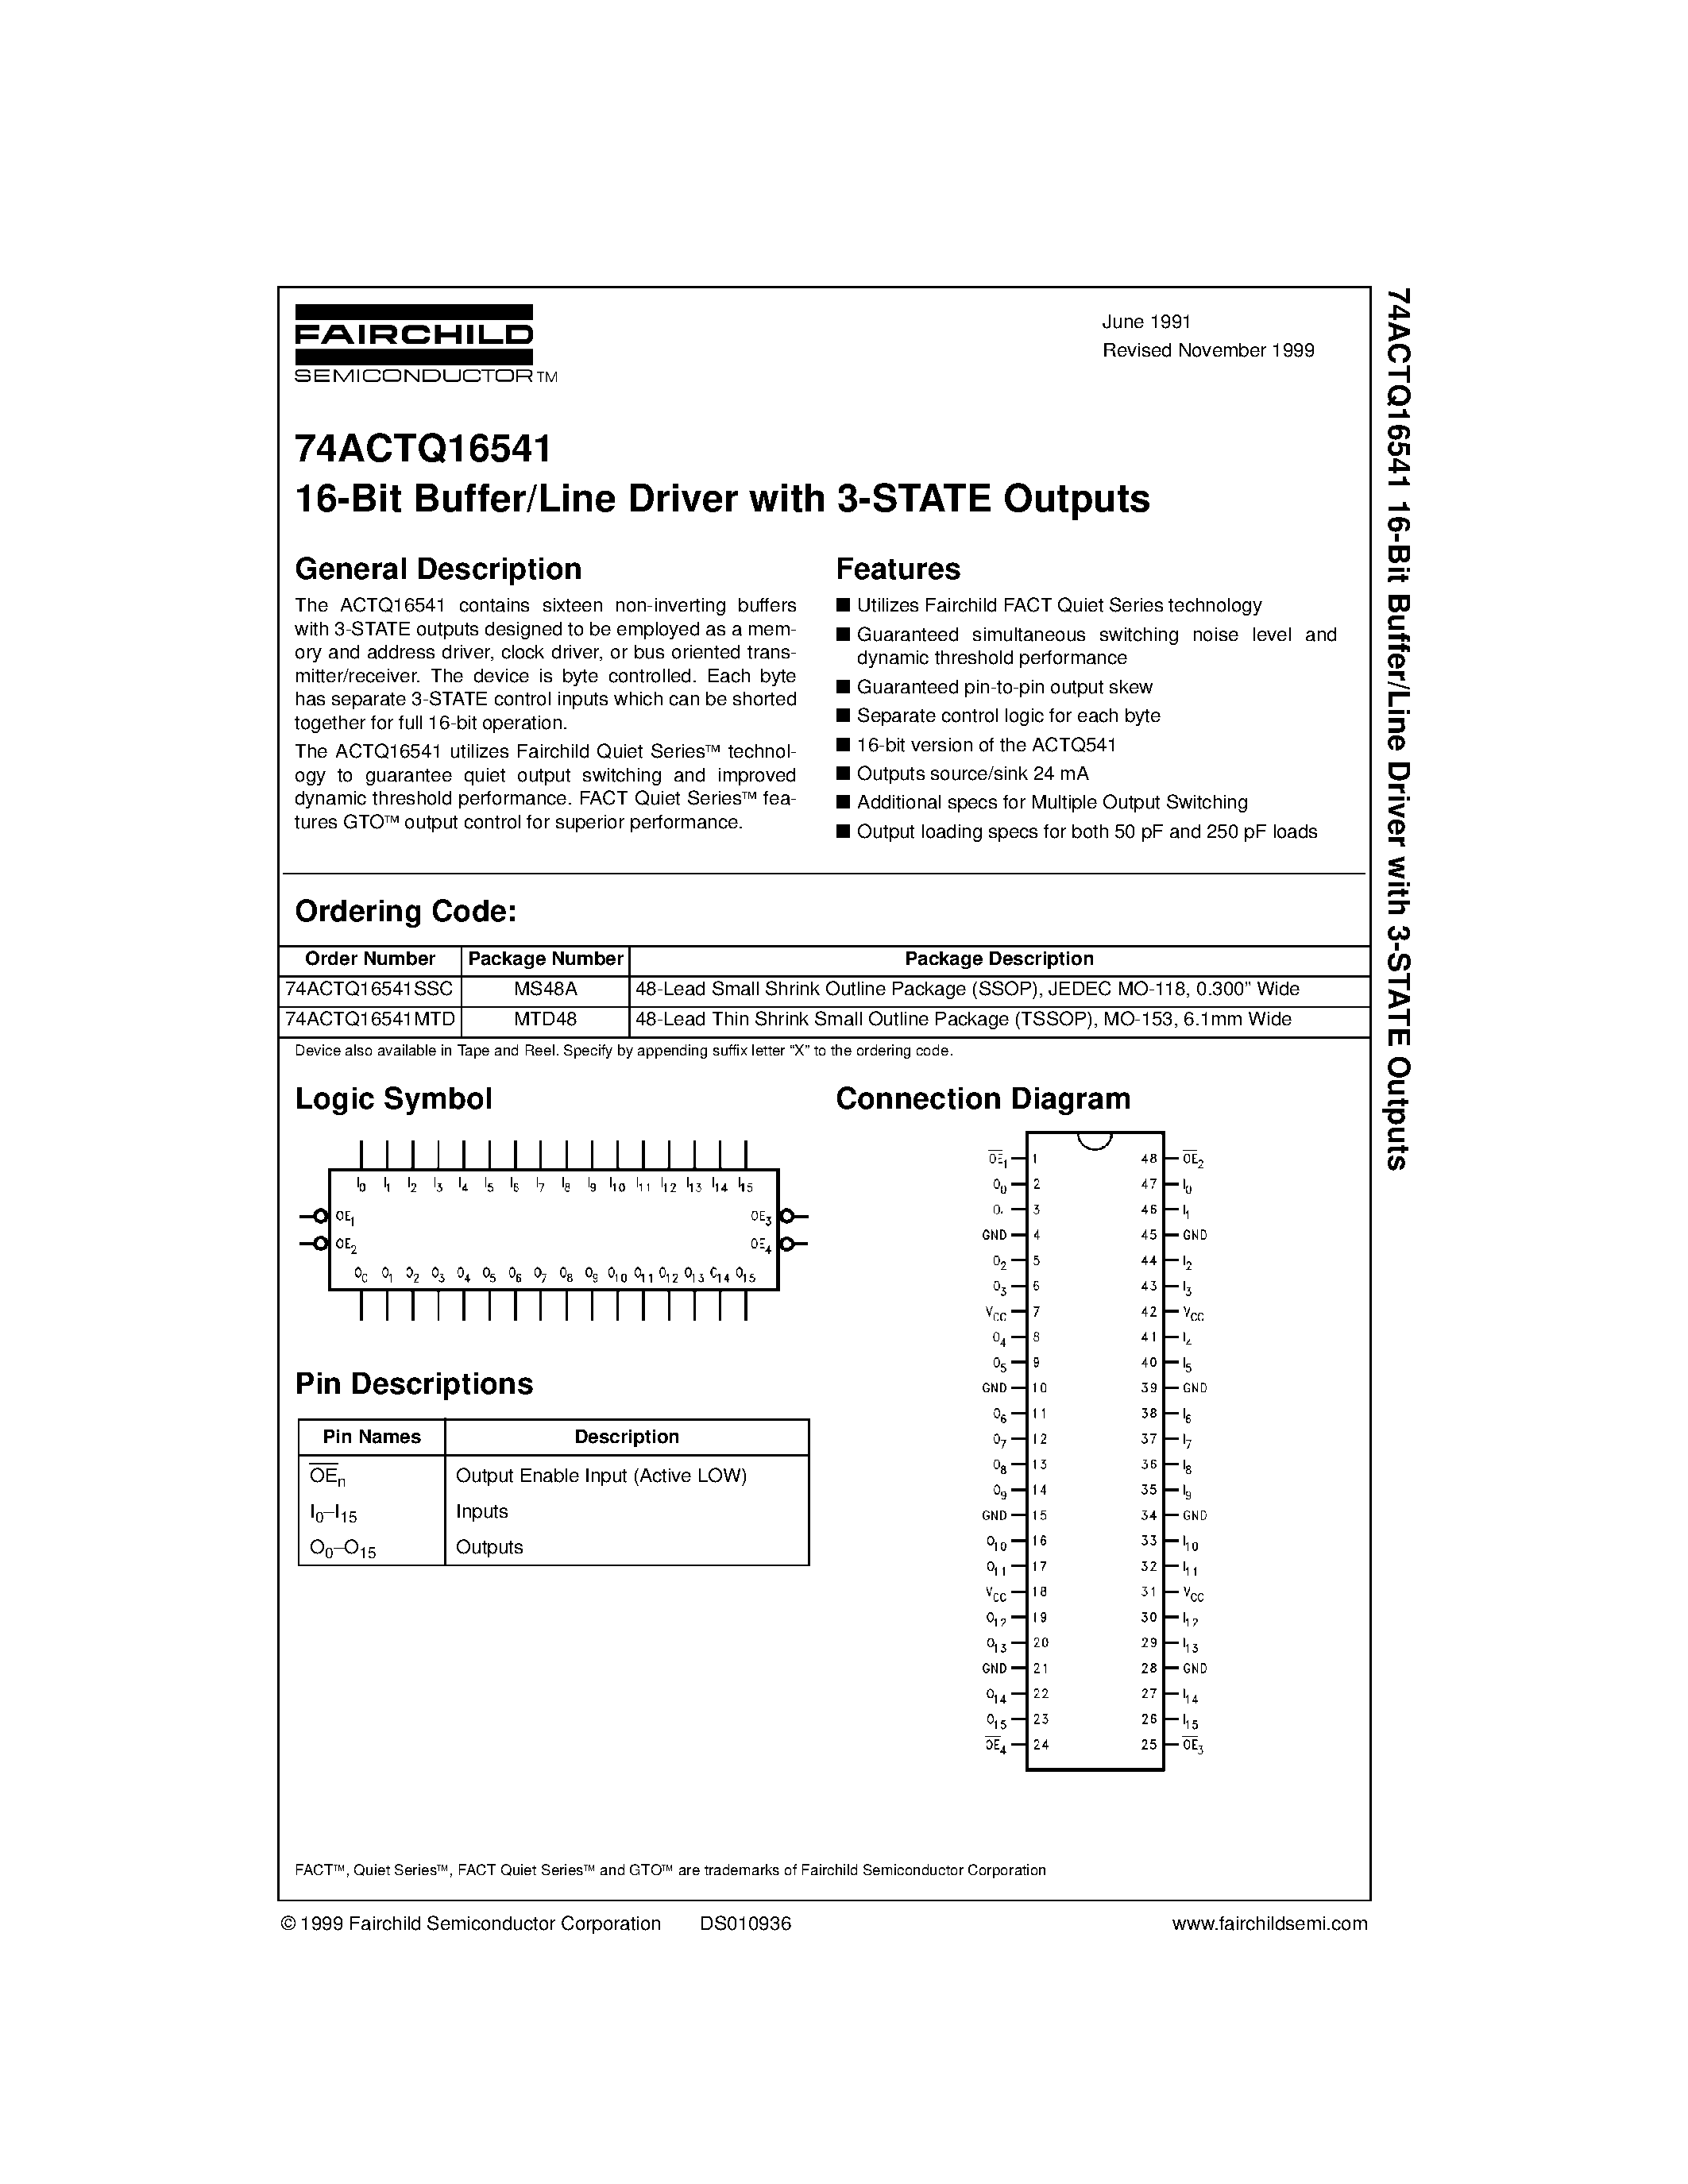 Datasheet 74ACTQ16541MTD - 16-Bit Buffer/Line Driver with 3-STATE Outputs page 1